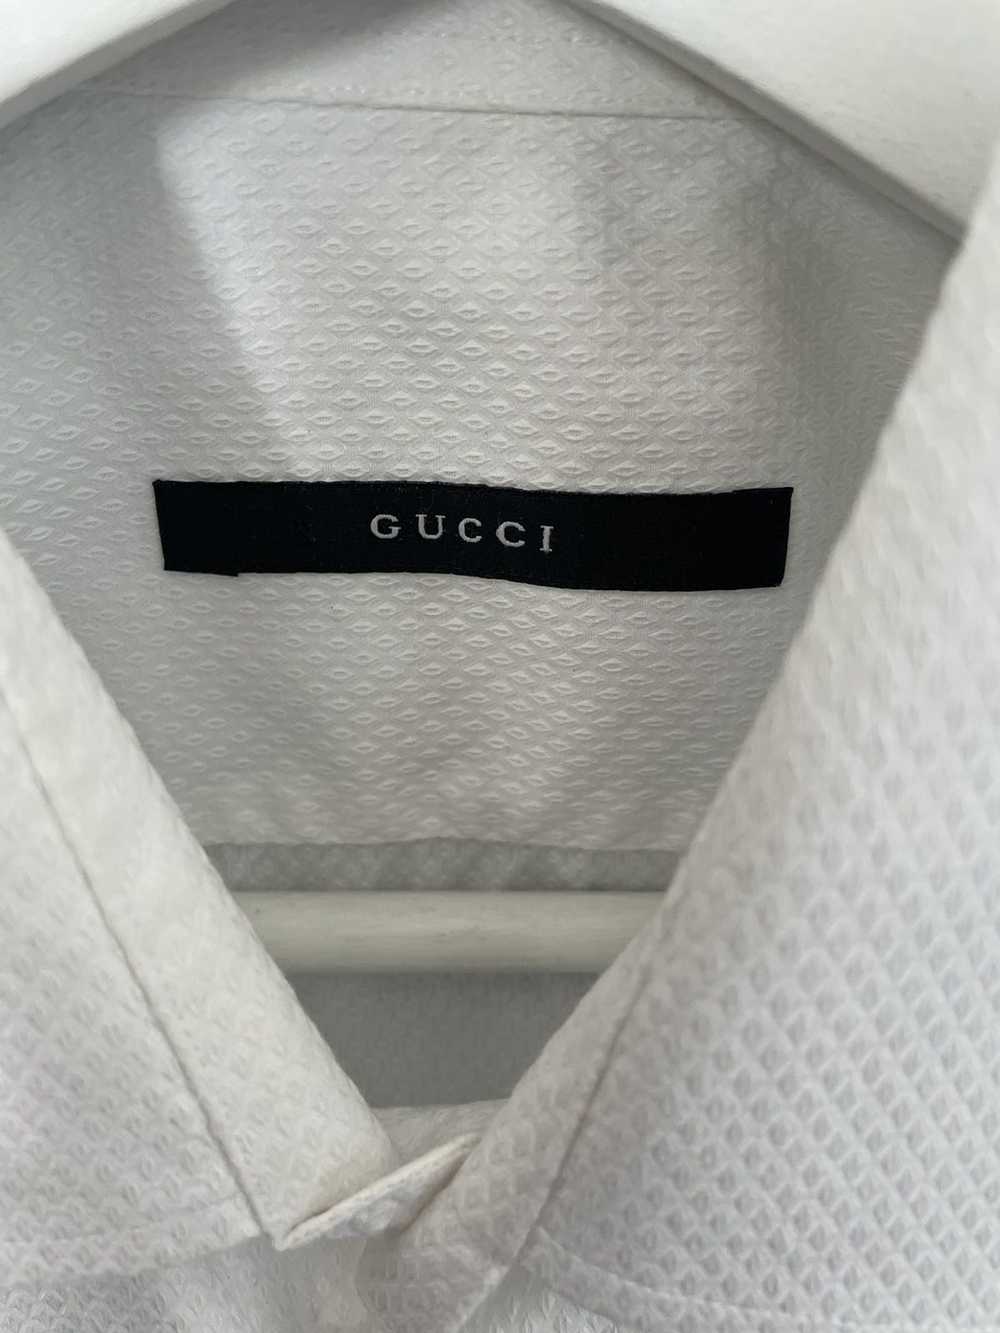 Gucci French cuff button up - image 6